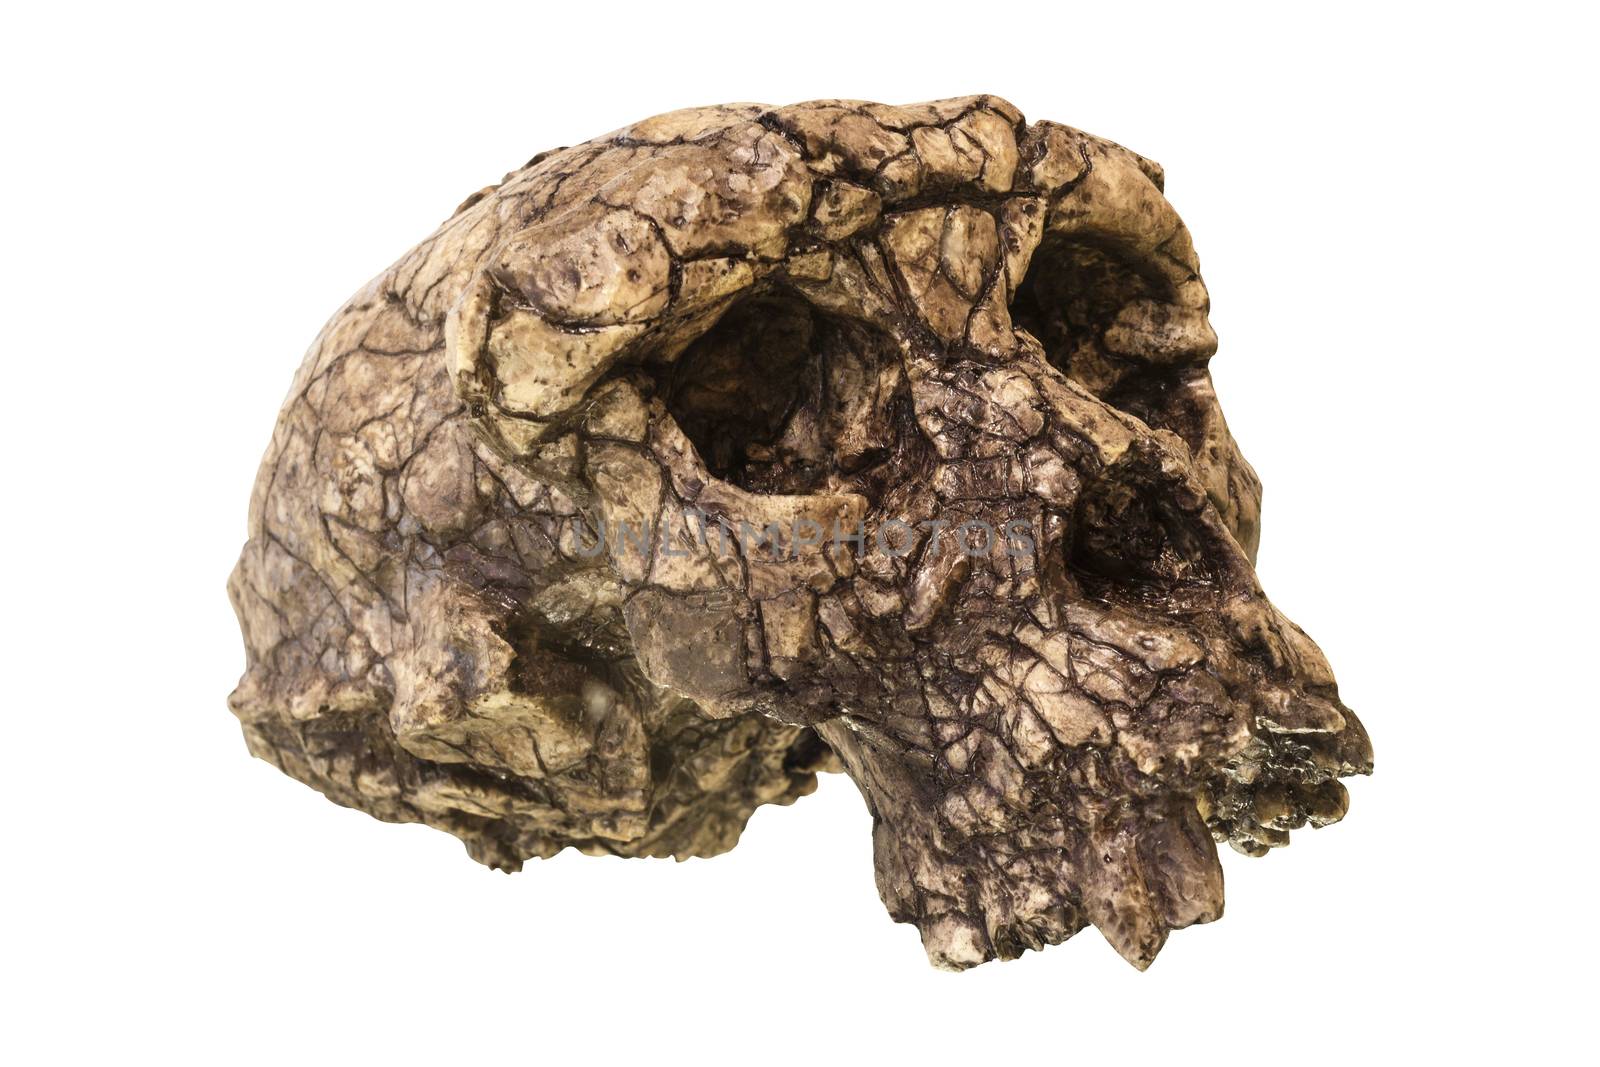 Sahelanthropus tchadensis Skull ( Toumai ) . Discovered in 2001 in Djurab desert in Northern Chad , Central africa . Dated to 7-6 million years ago by stockdevil